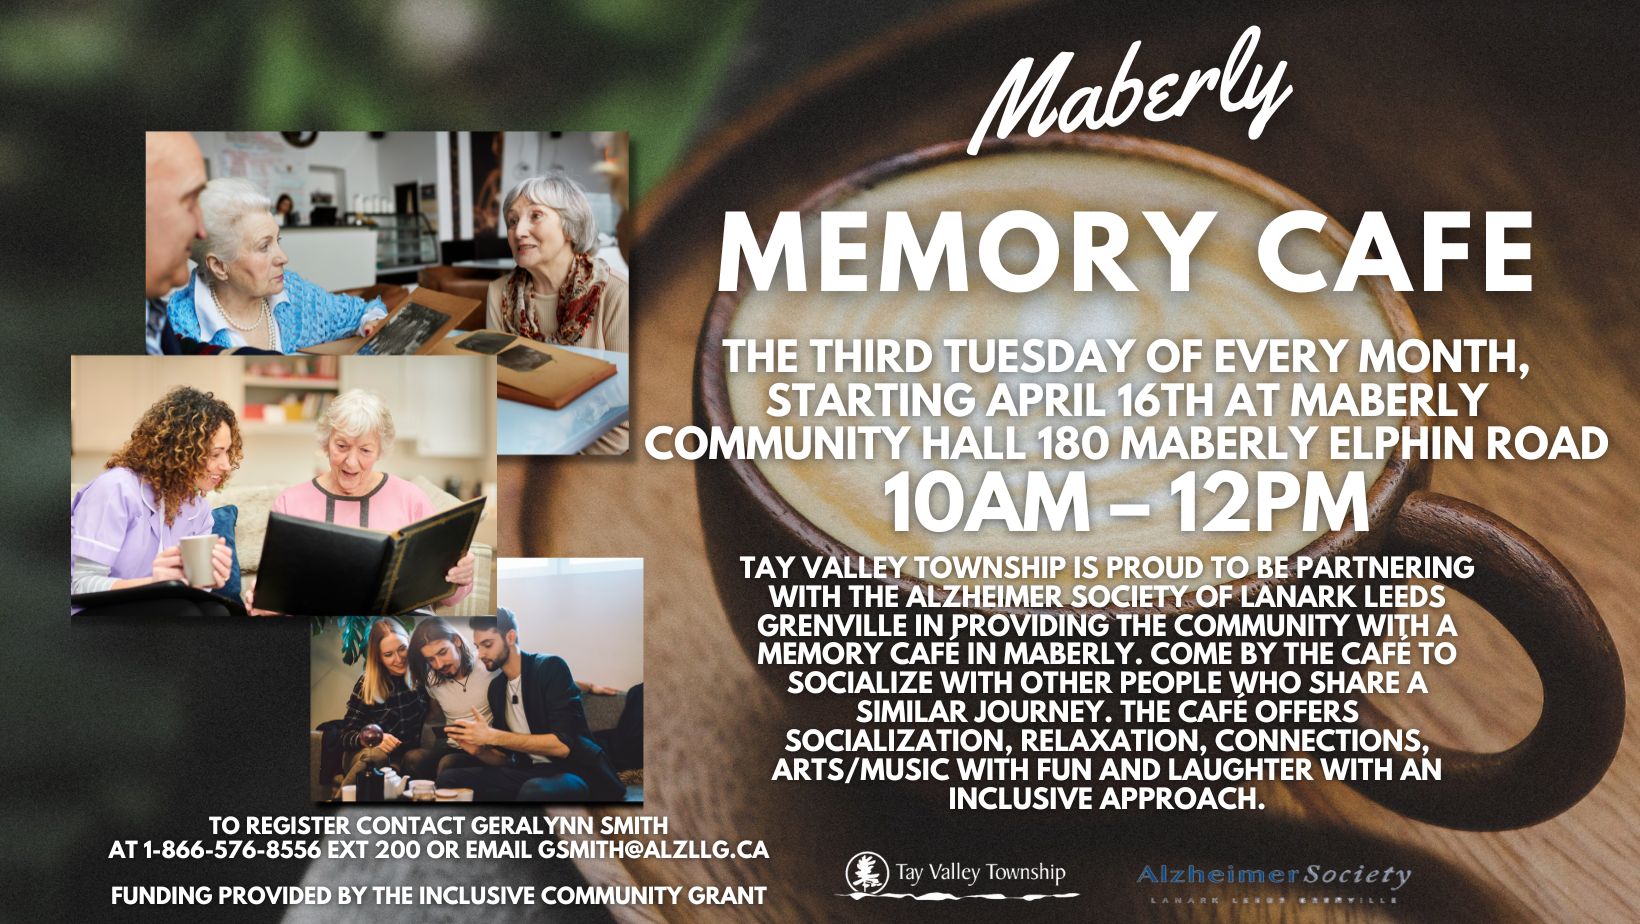 Maberly Memory Cafe Poster